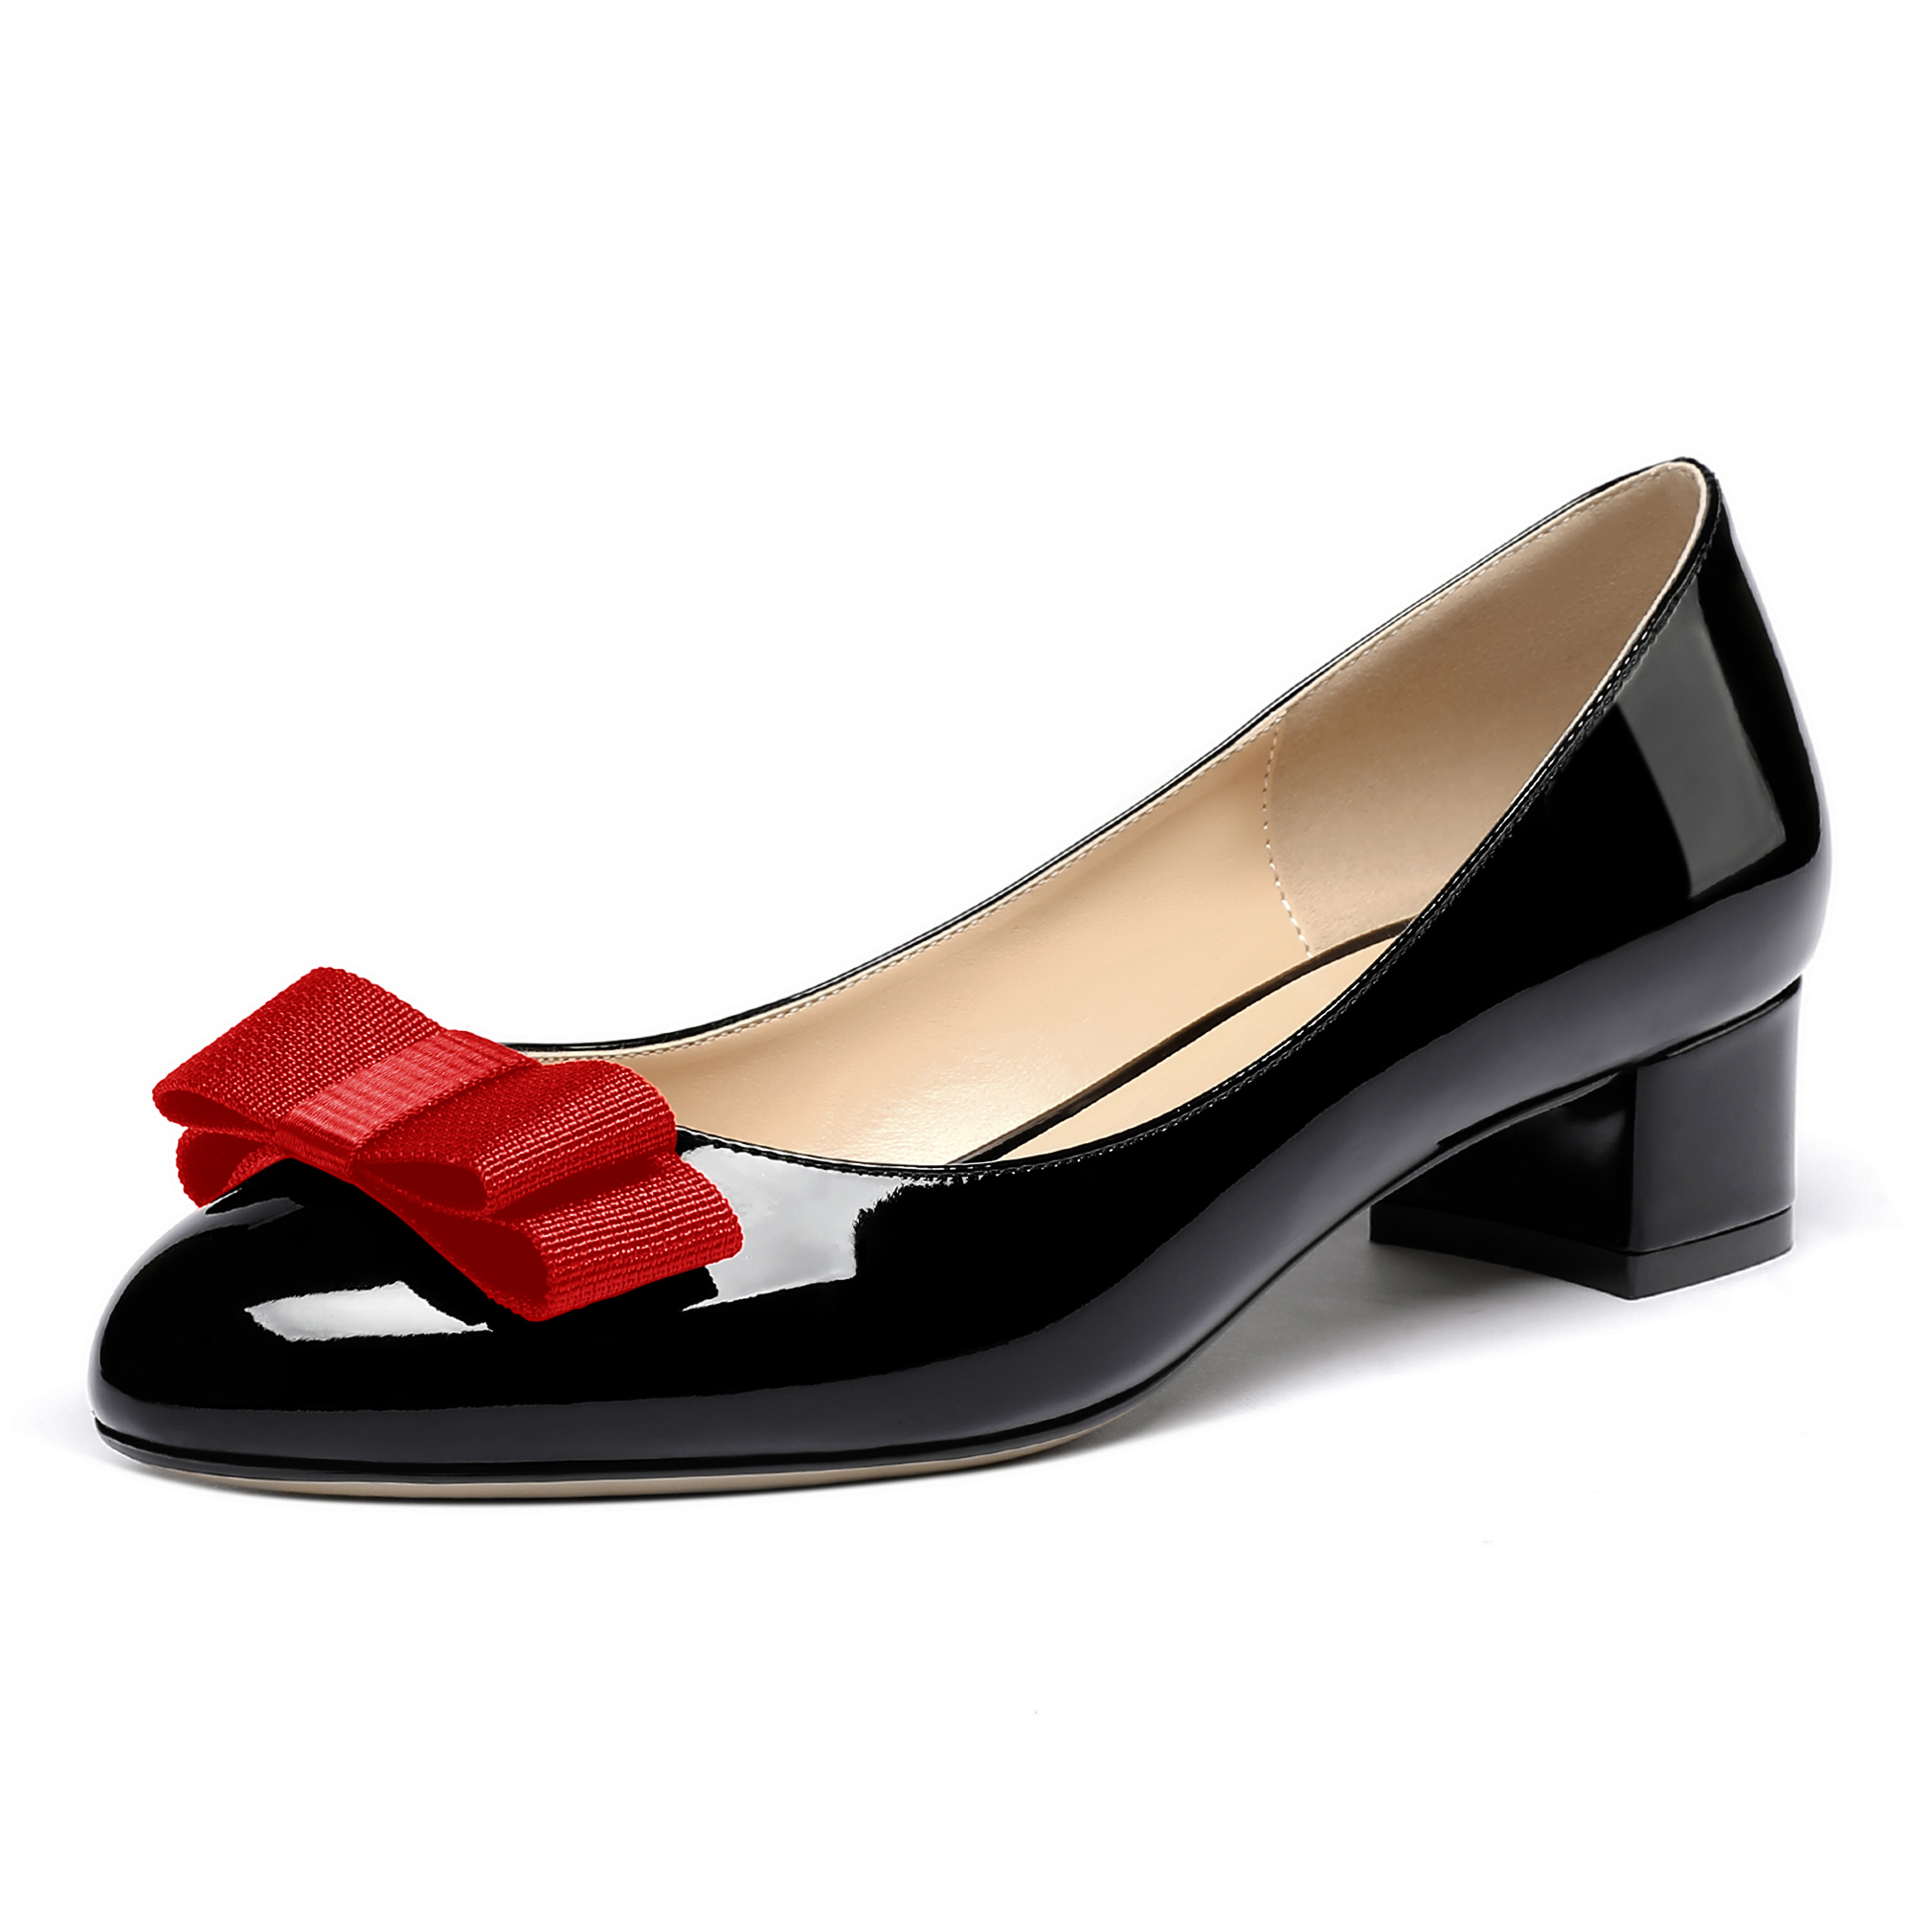 Adrienne Slip On Pumps With Cute Bowknot